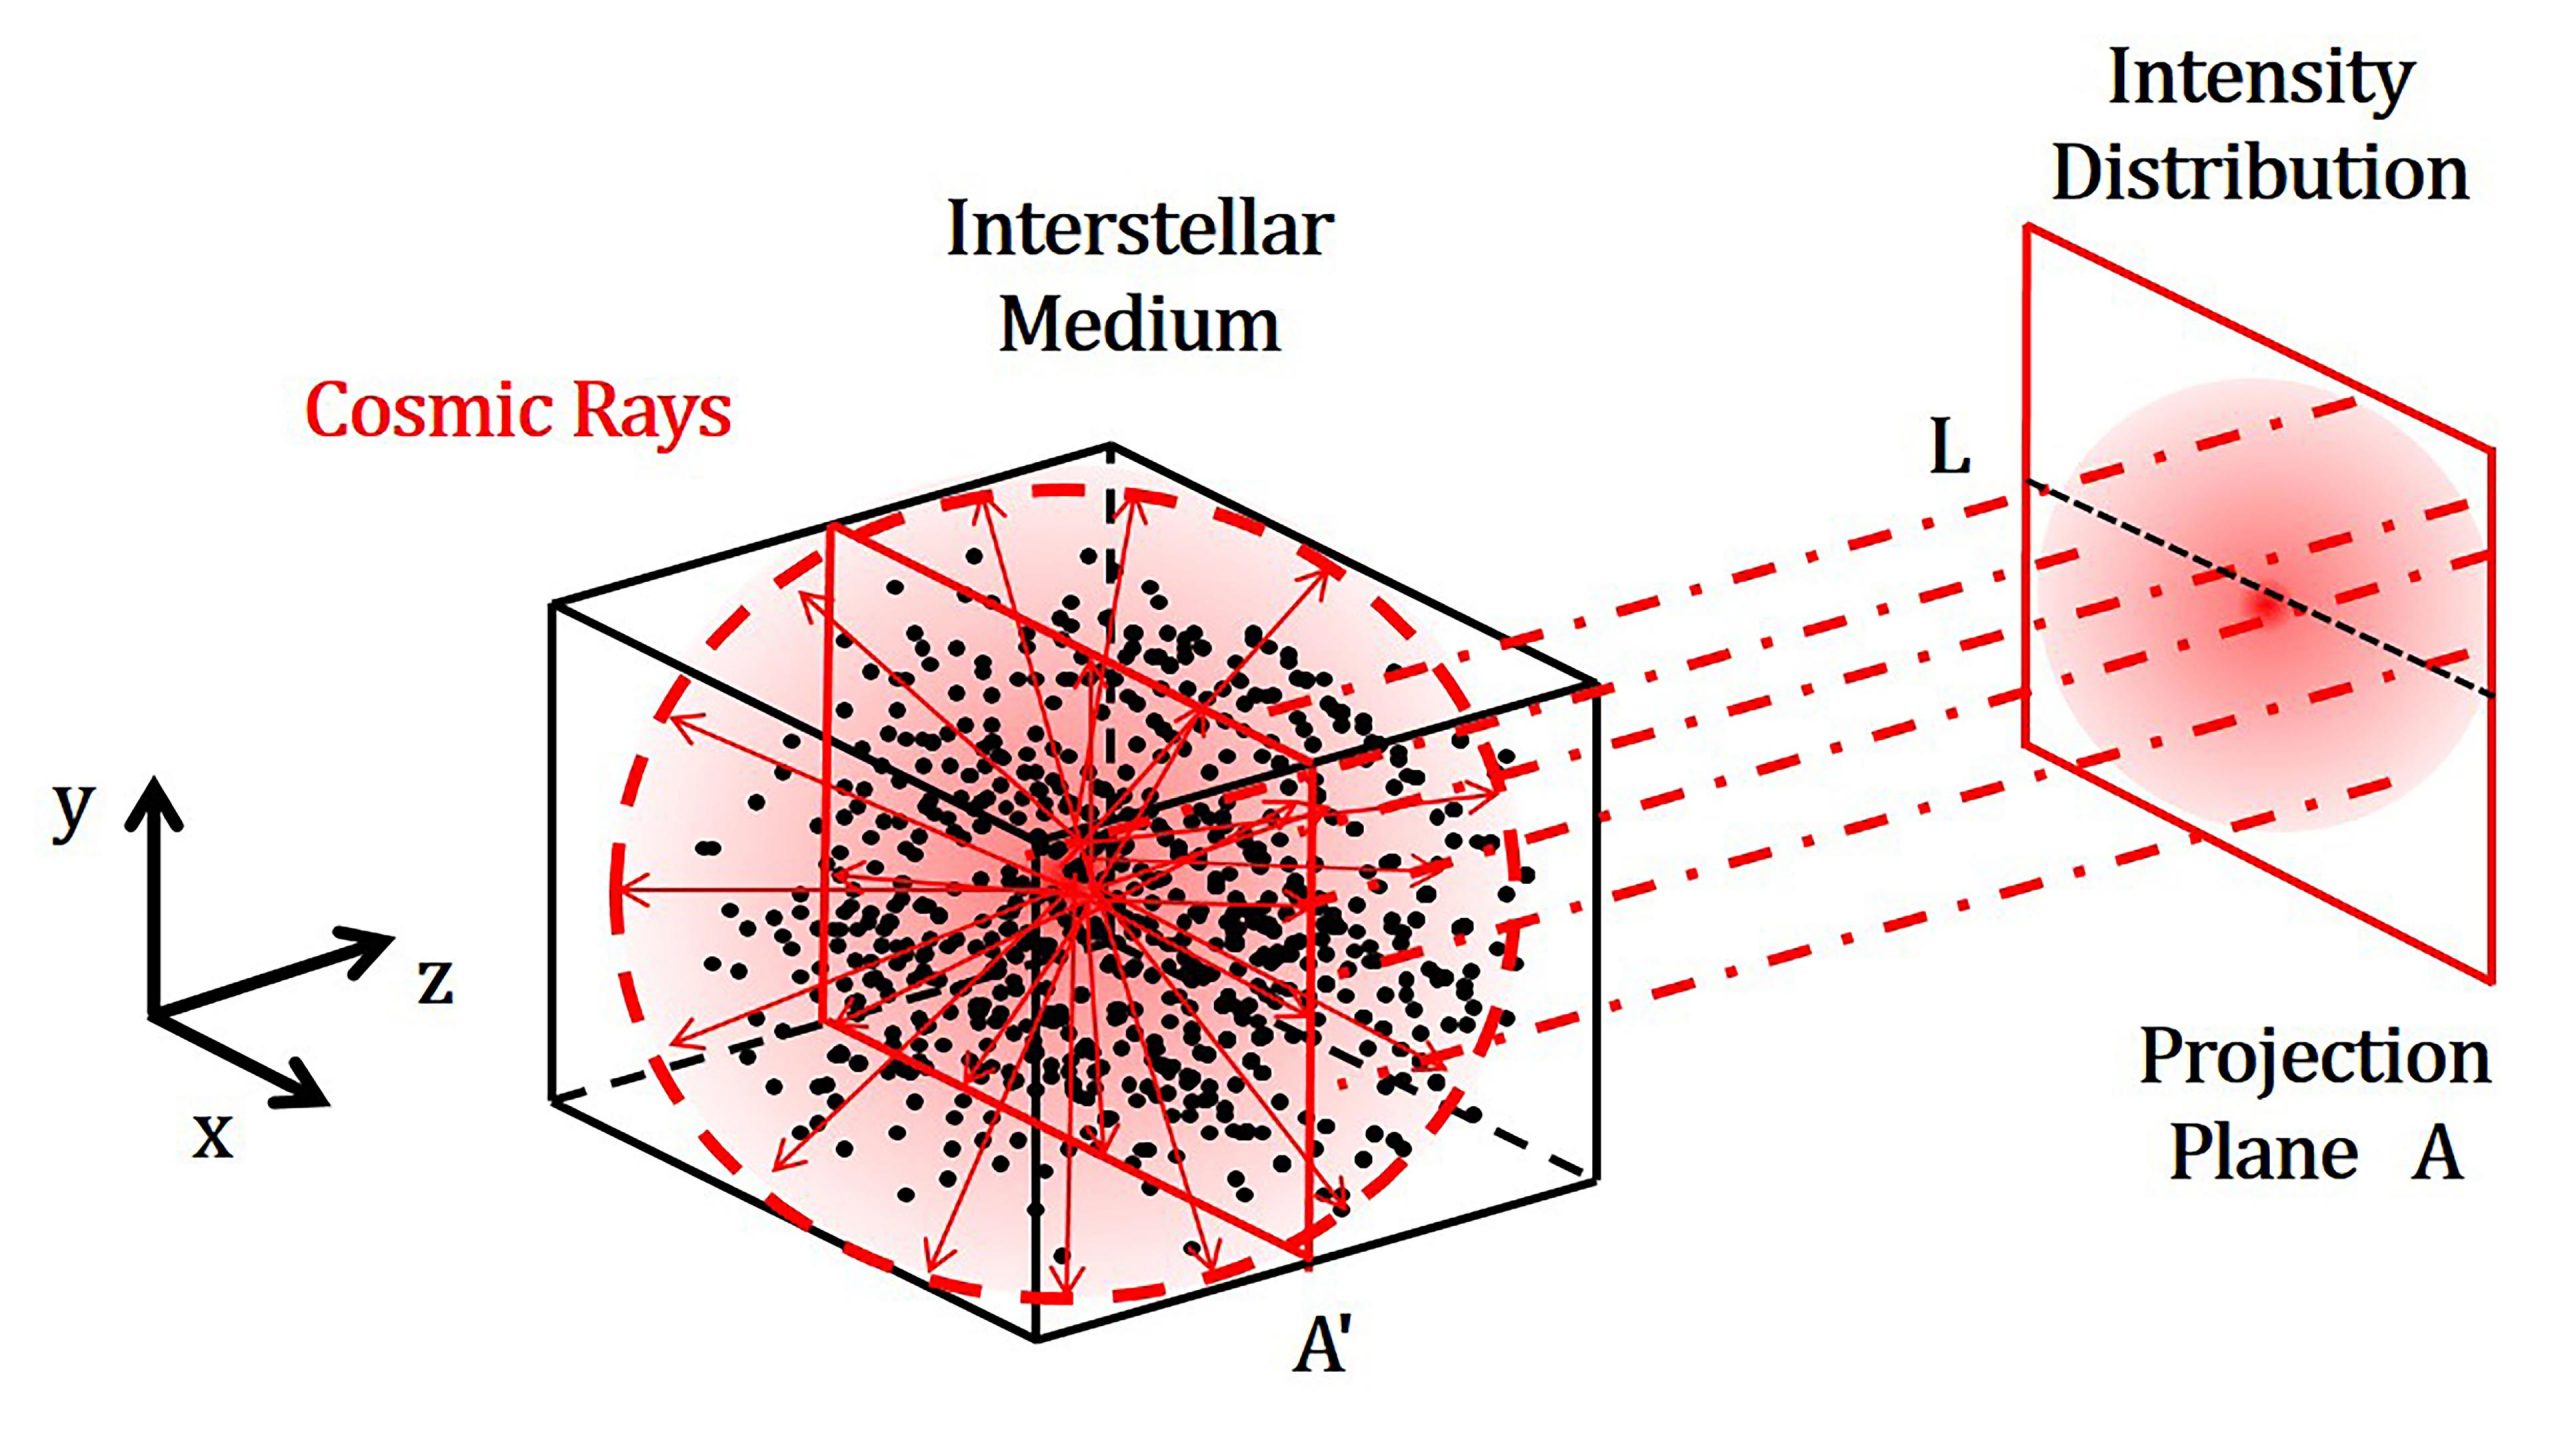 Probing Deeper Into the Origins of Cosmic Rays With Geometric Brownian